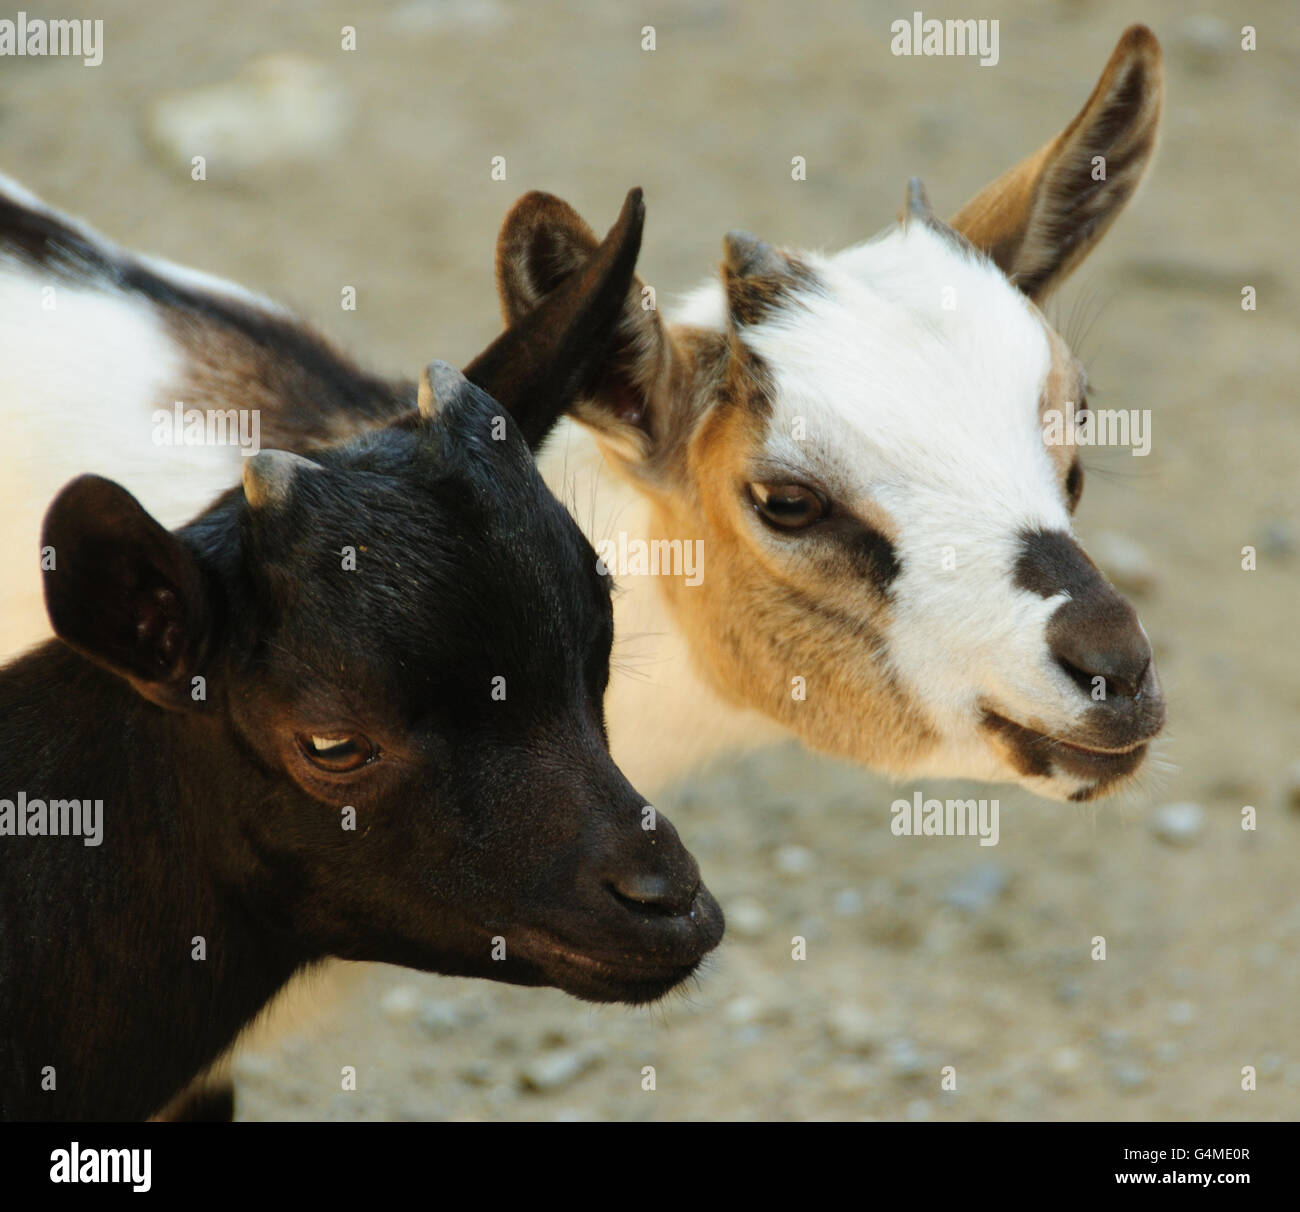 Two young goats just beginning to grow horns. Stock Photo